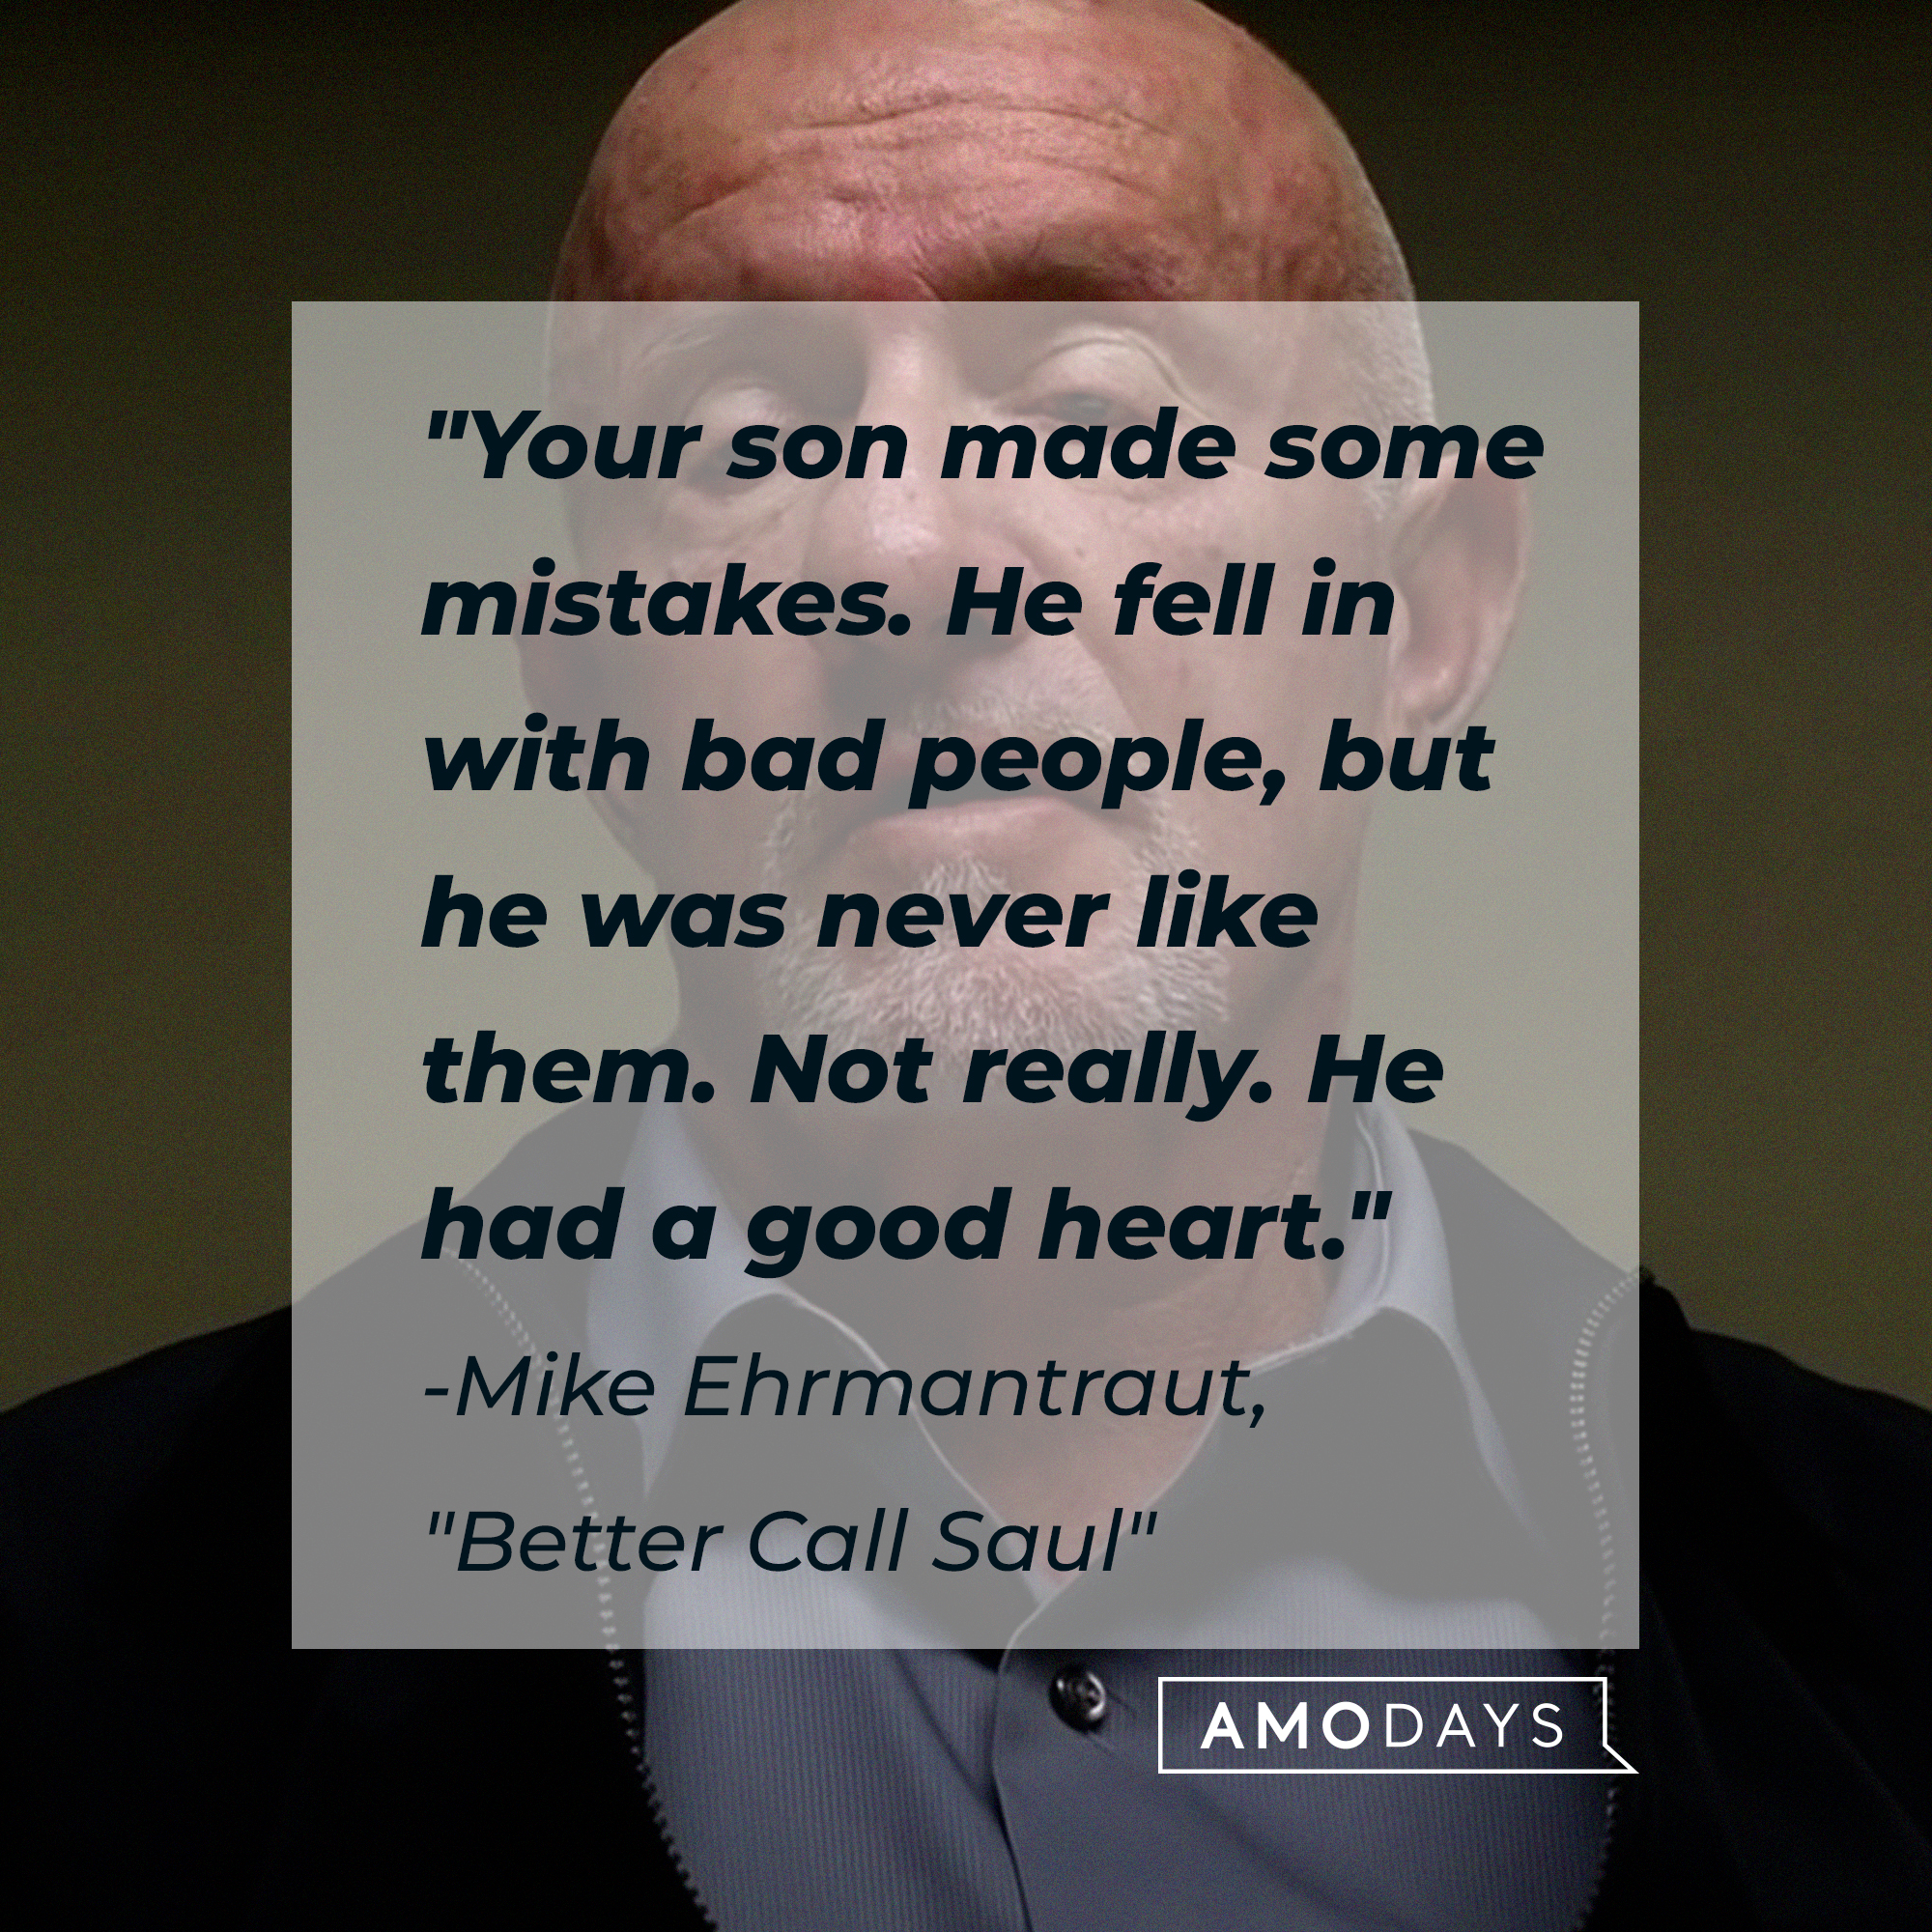 Mike Ehrmantraut with his quote, "Your son made some mistakes. He fell in with bad people, but he was never like them. Not really. He had a good heart." | Source: youtube.com/breakingbad